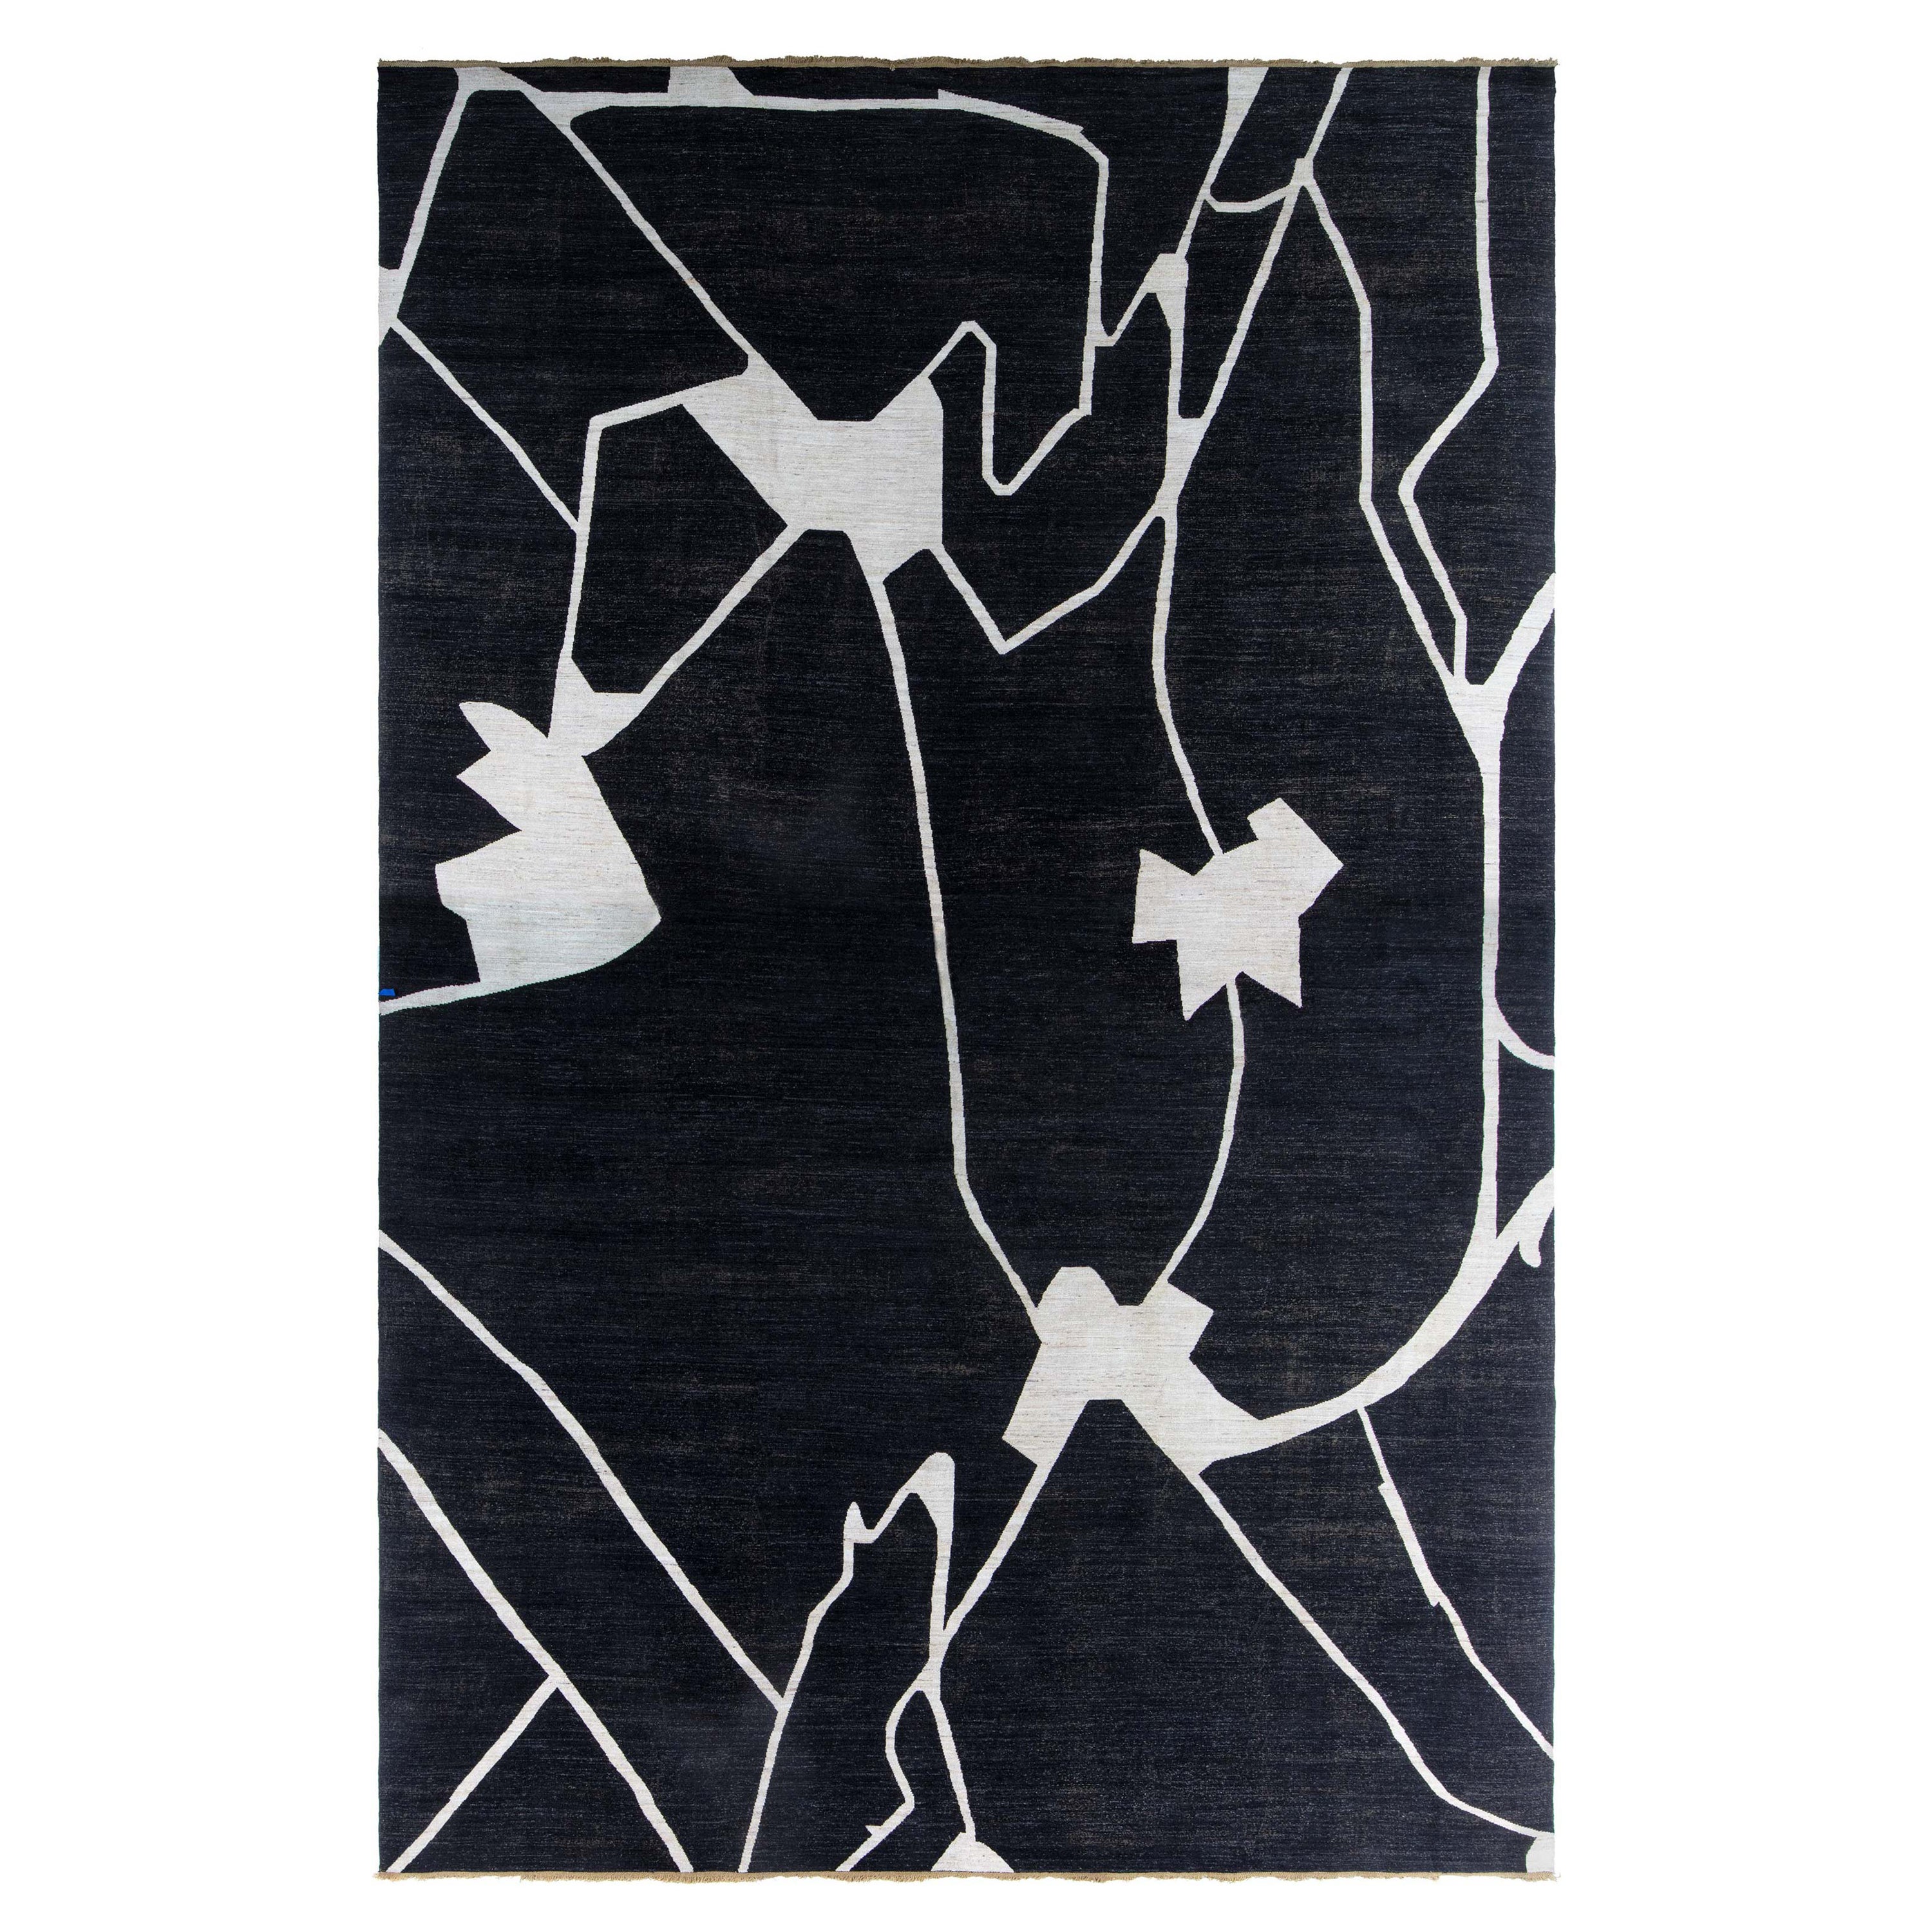 Large Contemporary Beige Black Hand Knotted Wool Rug by Doris Leslie Blau